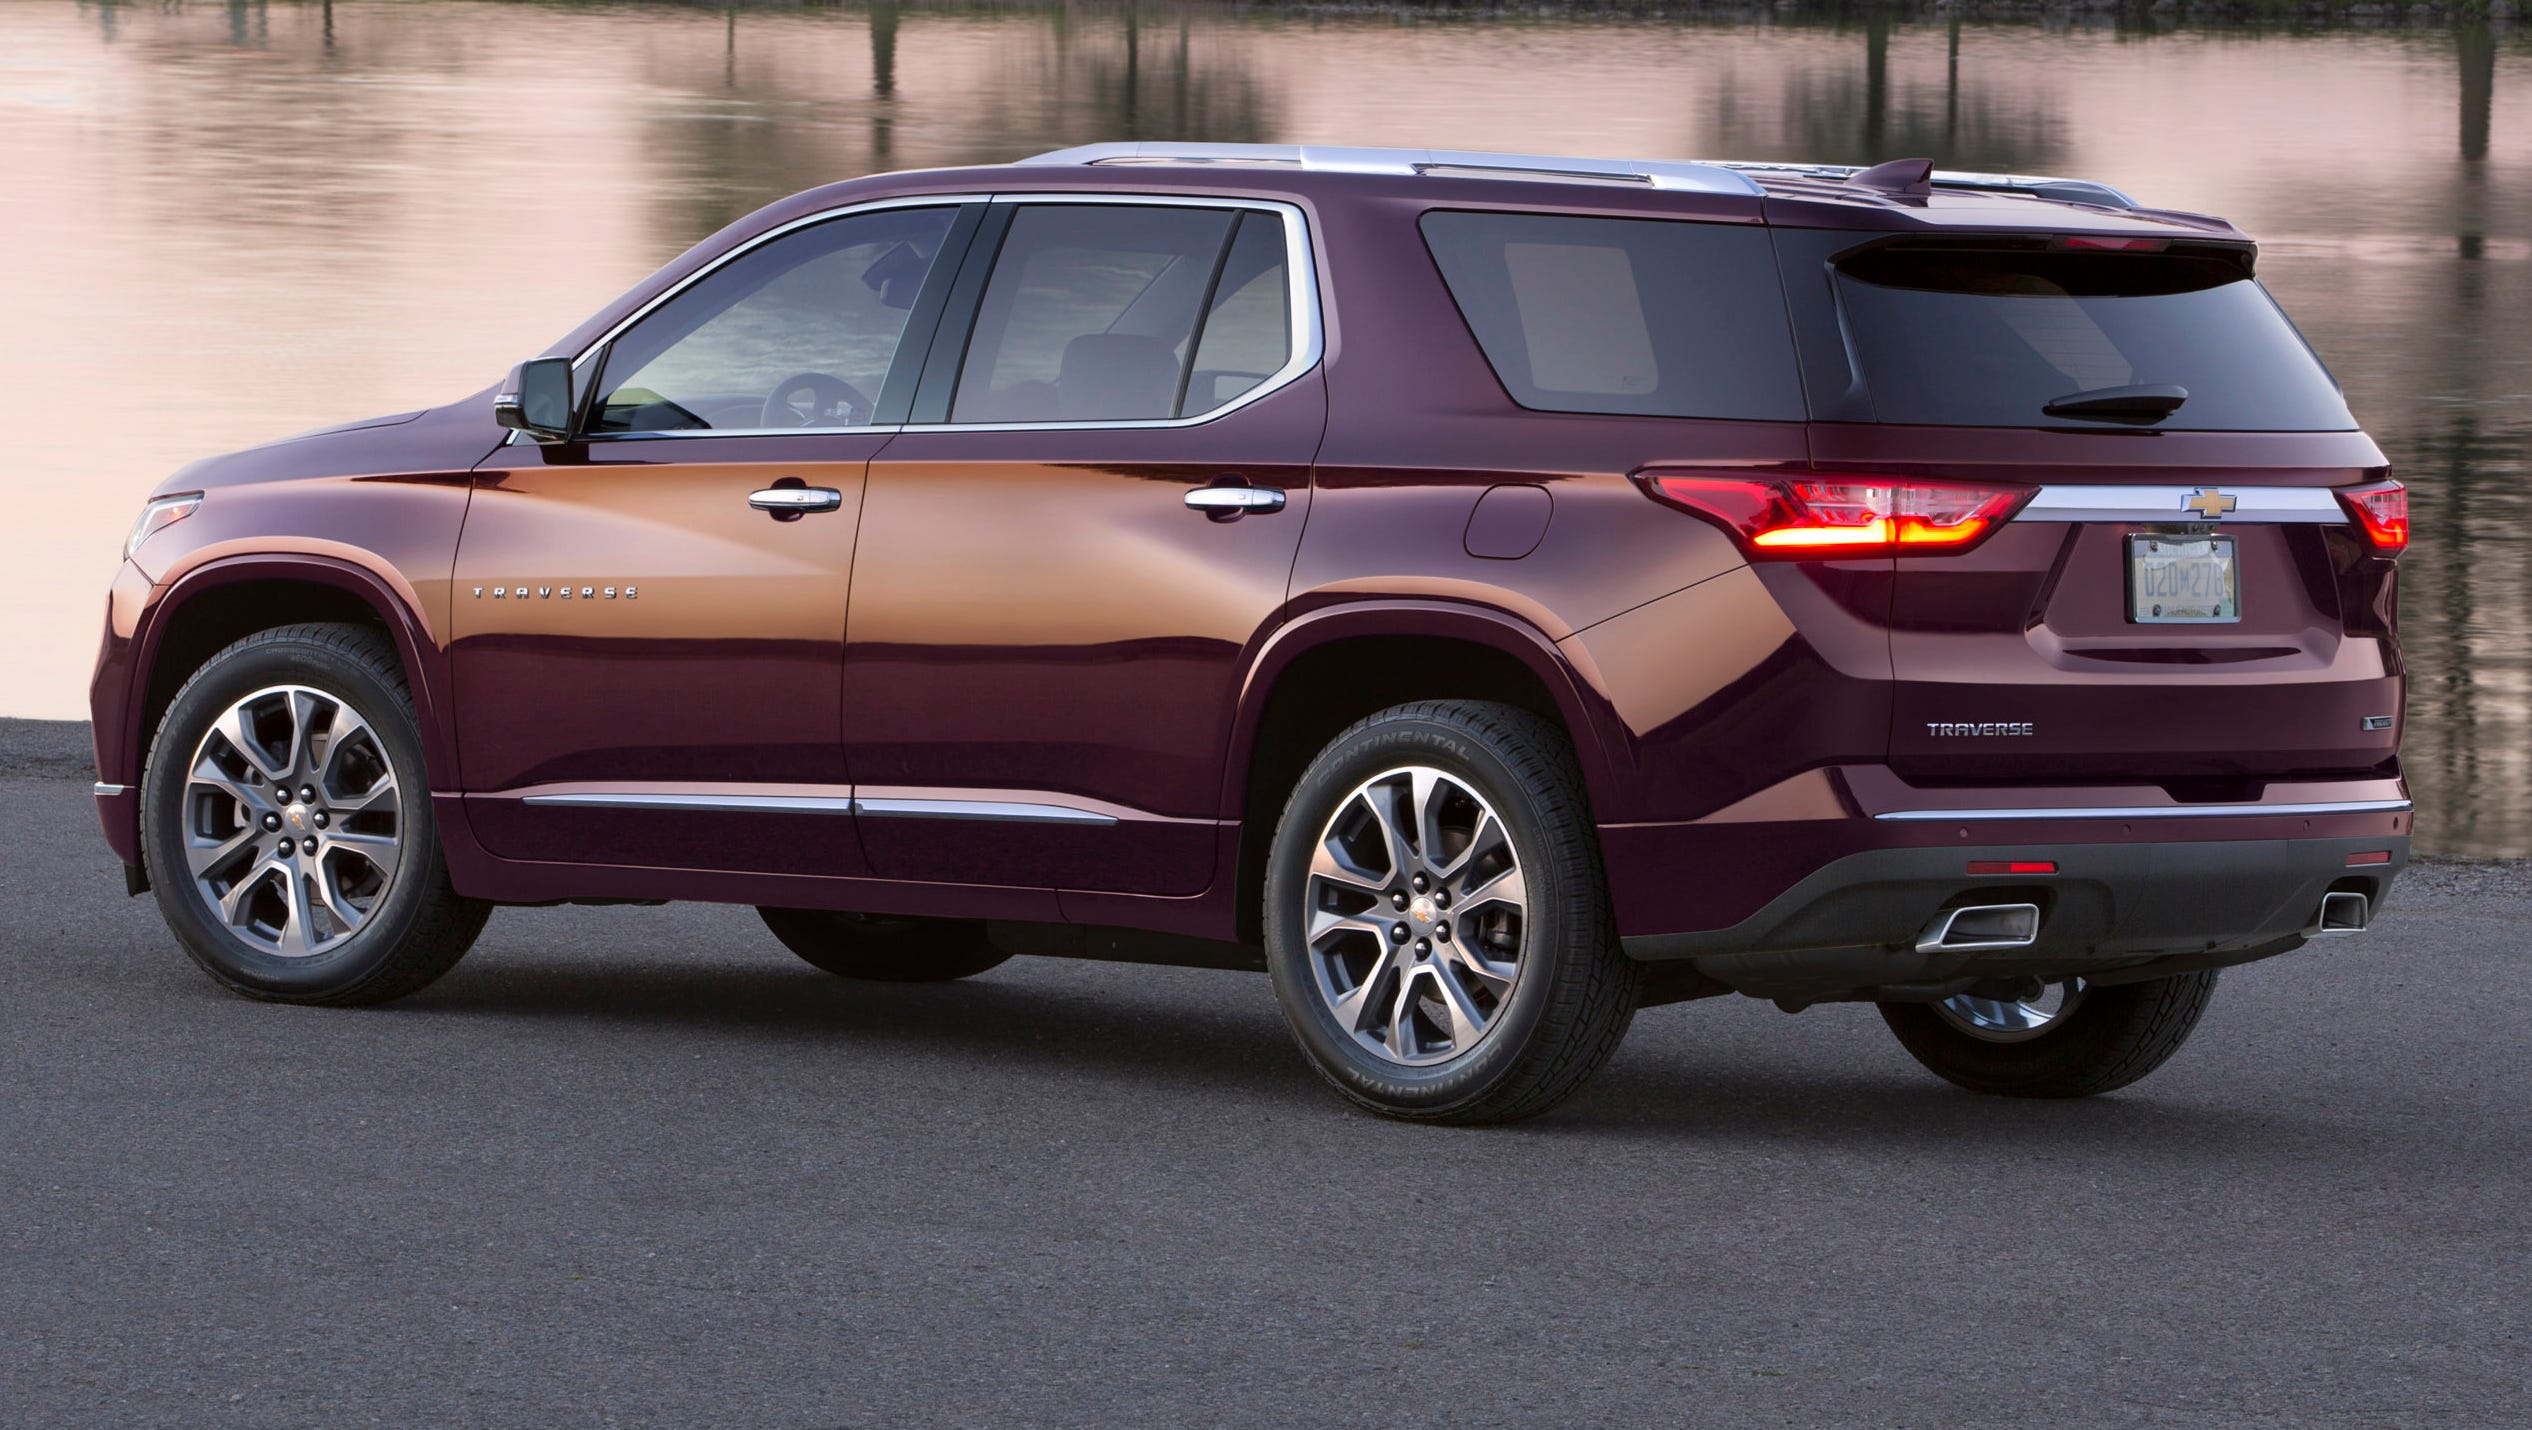 Review: Chevrolet Traverse is a pricey but impressive SUV